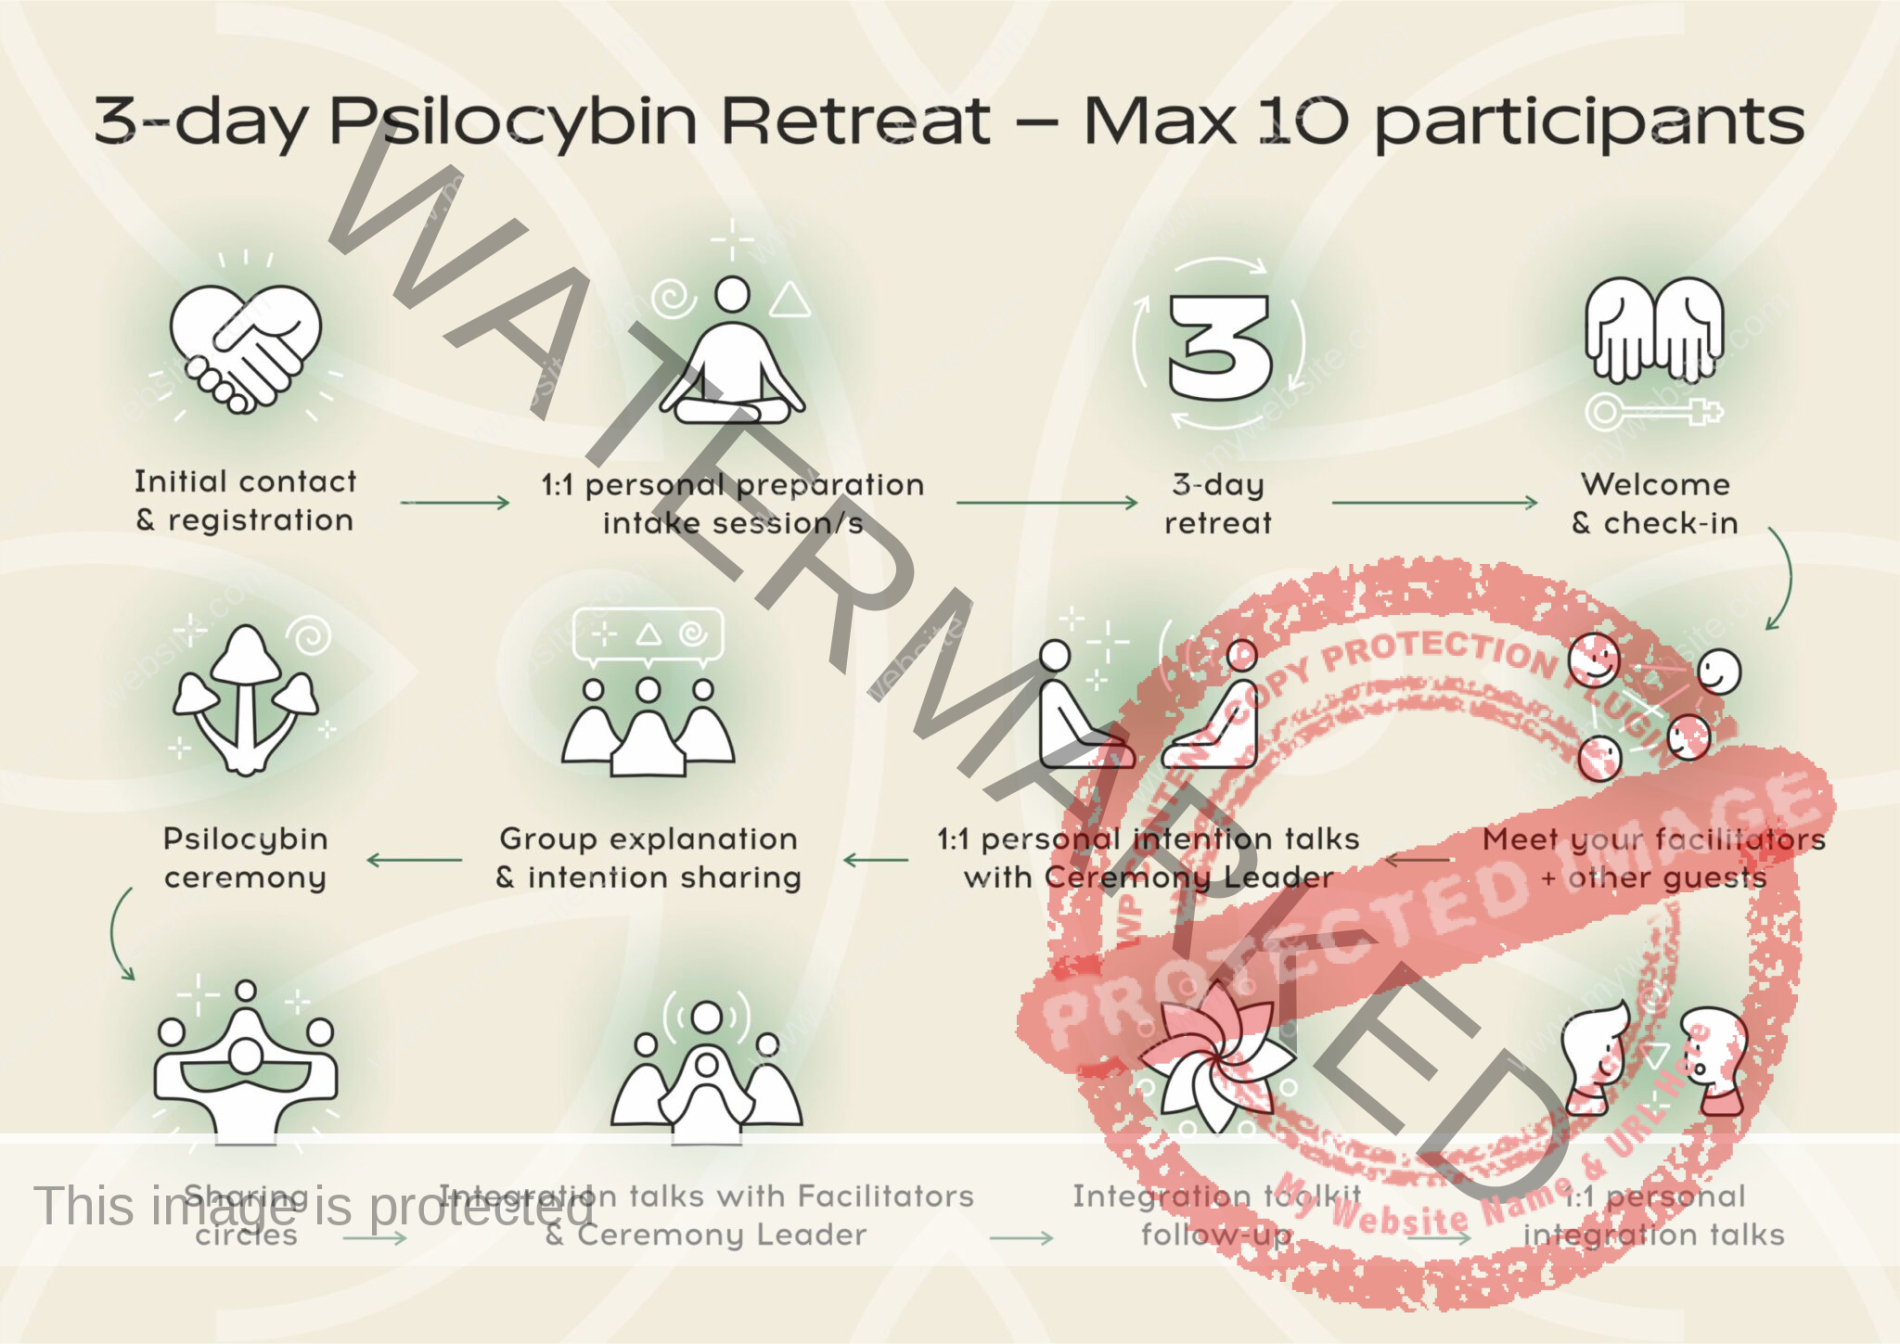 Infographic about a 3-day Psilocybin Retreat